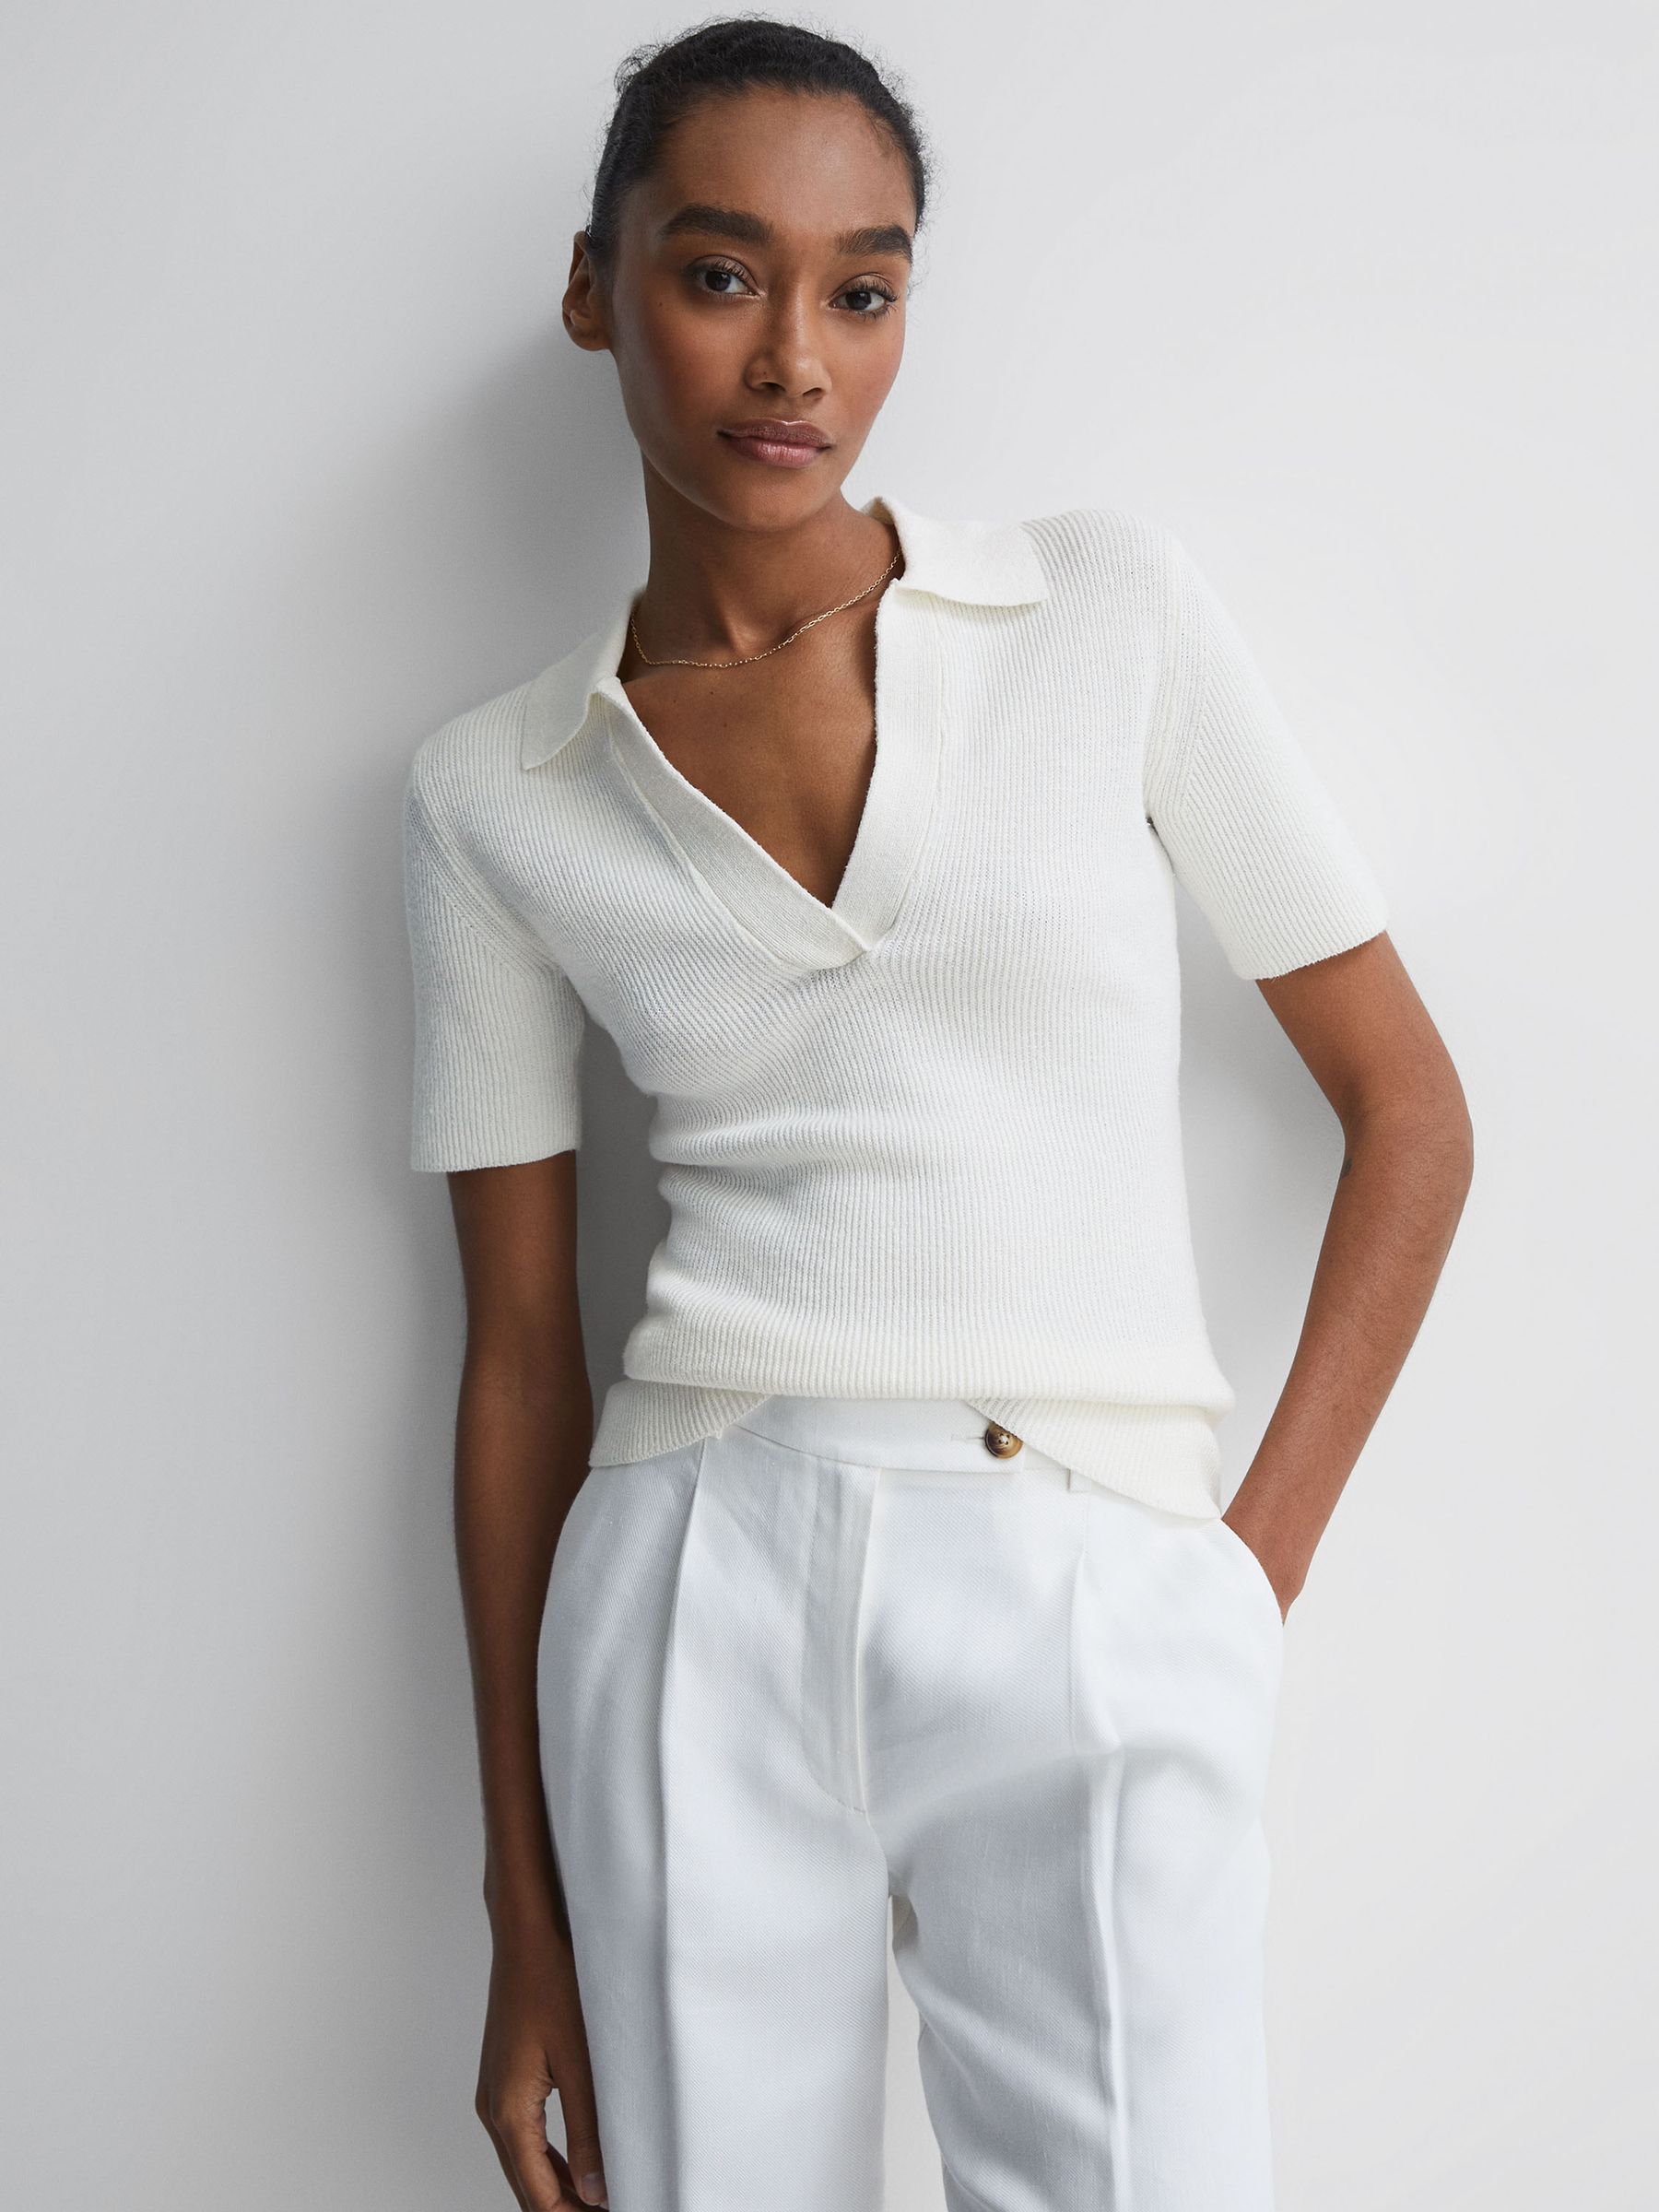 Reiss Devin V-Neck Collared Knit Top - REISS